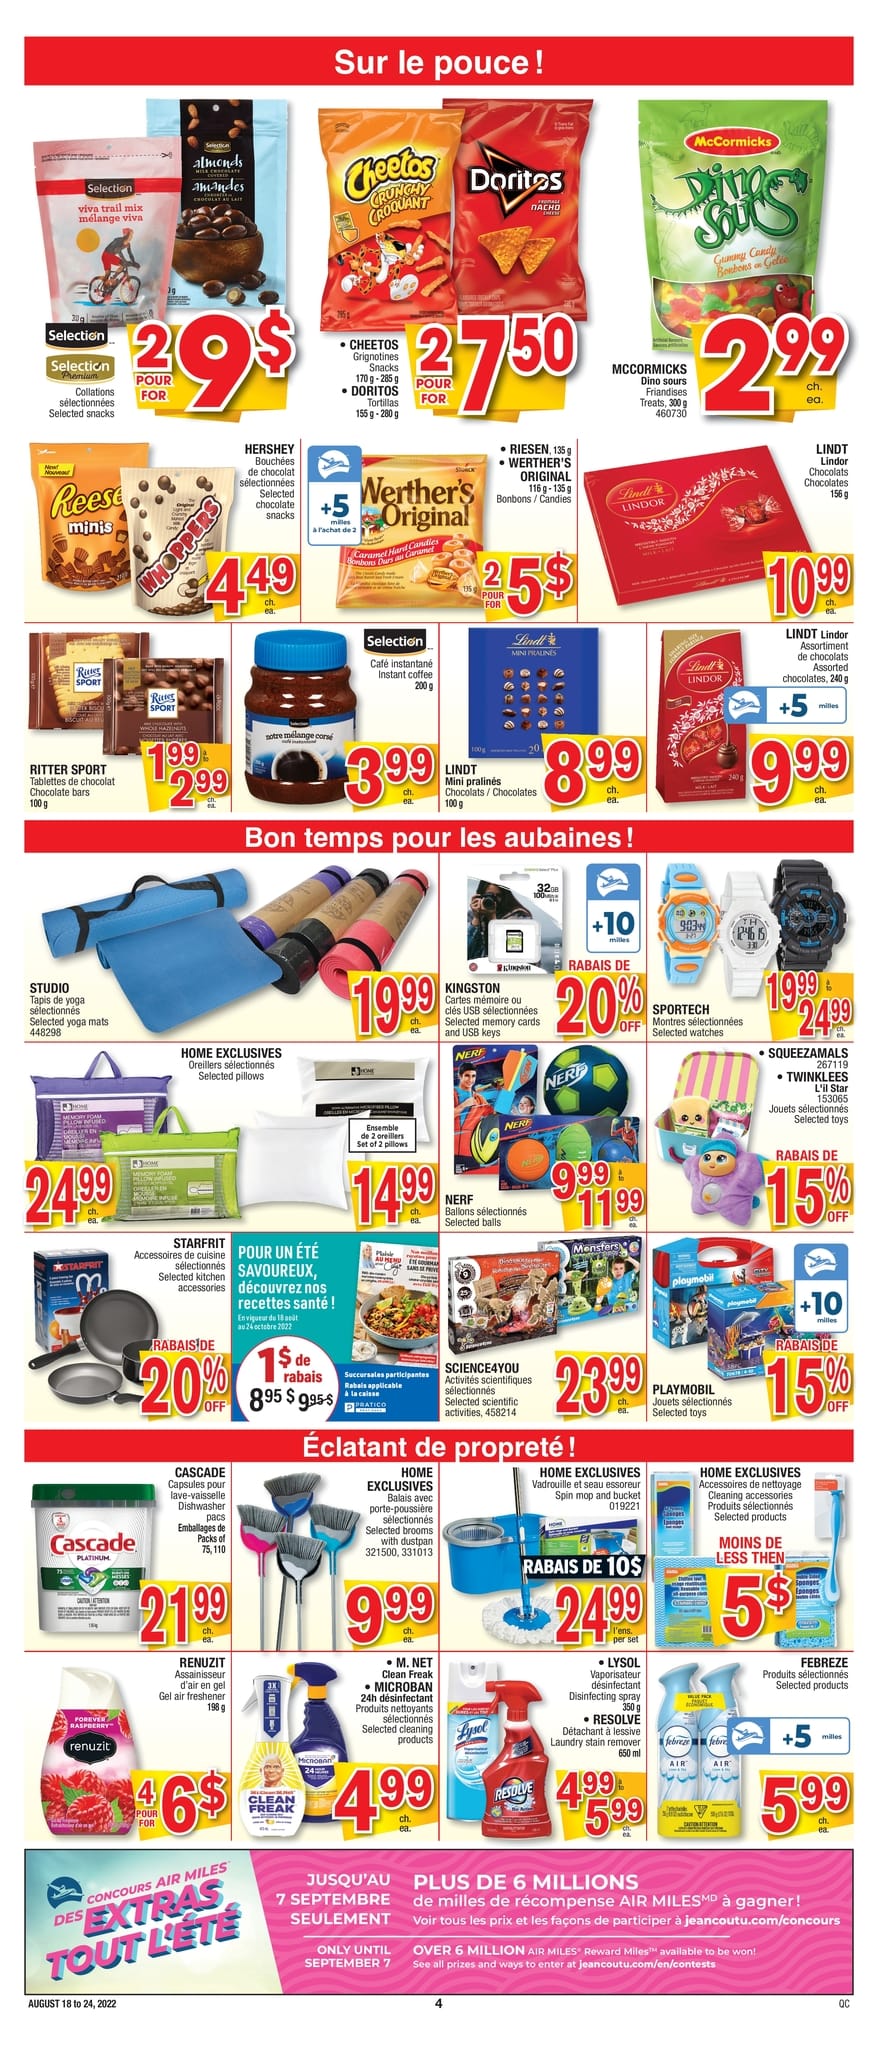 Circulaire Jean Coutu - Page 9